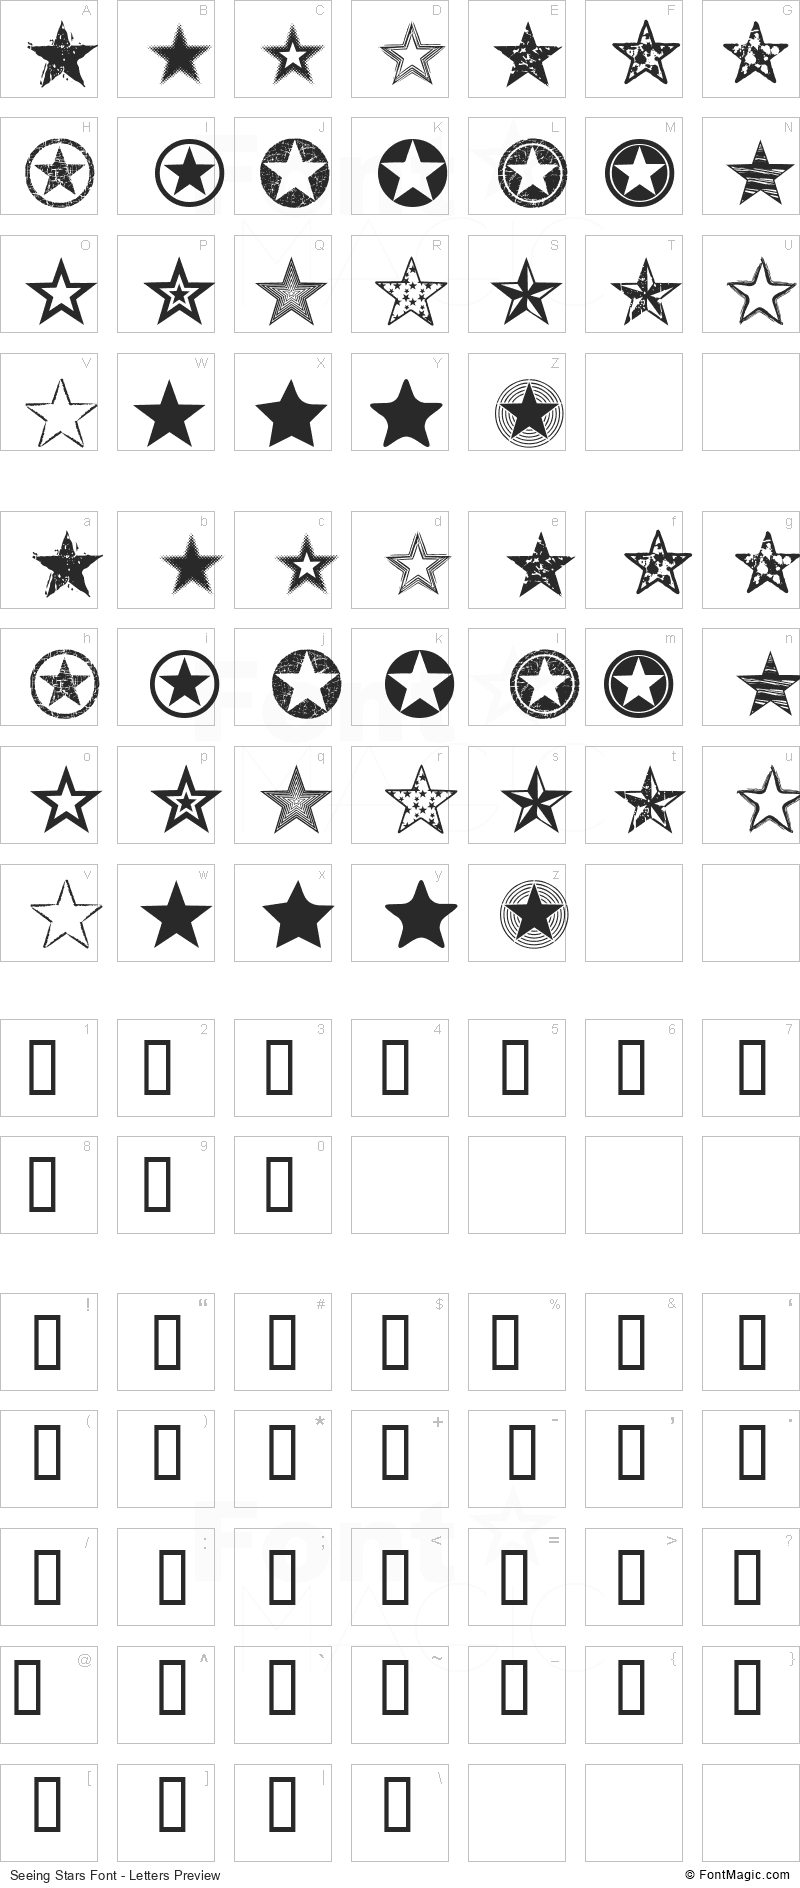 Seeing Stars Font - All Latters Preview Chart